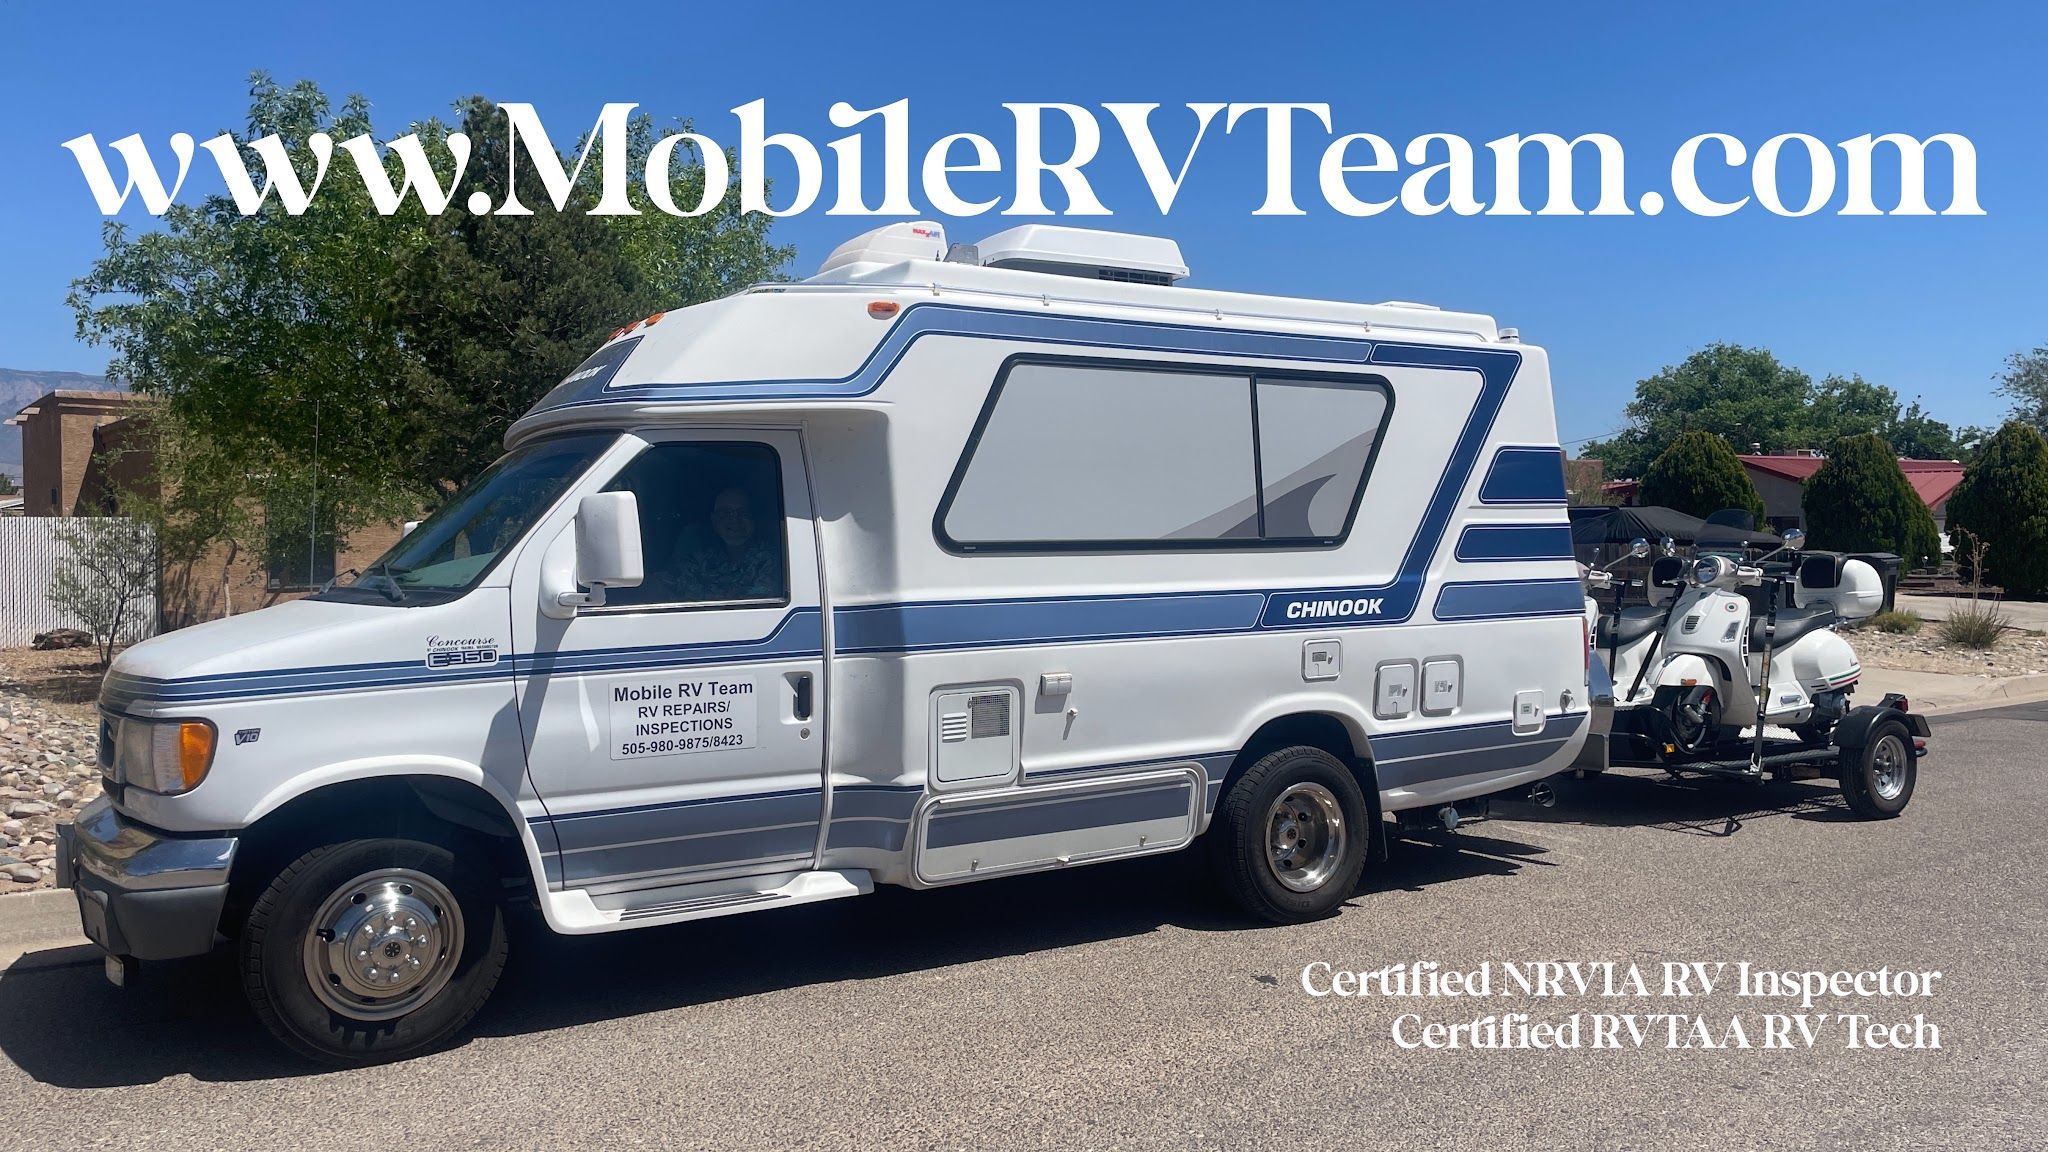 Services & Products Mobile RV Team in Rio Rancho NM